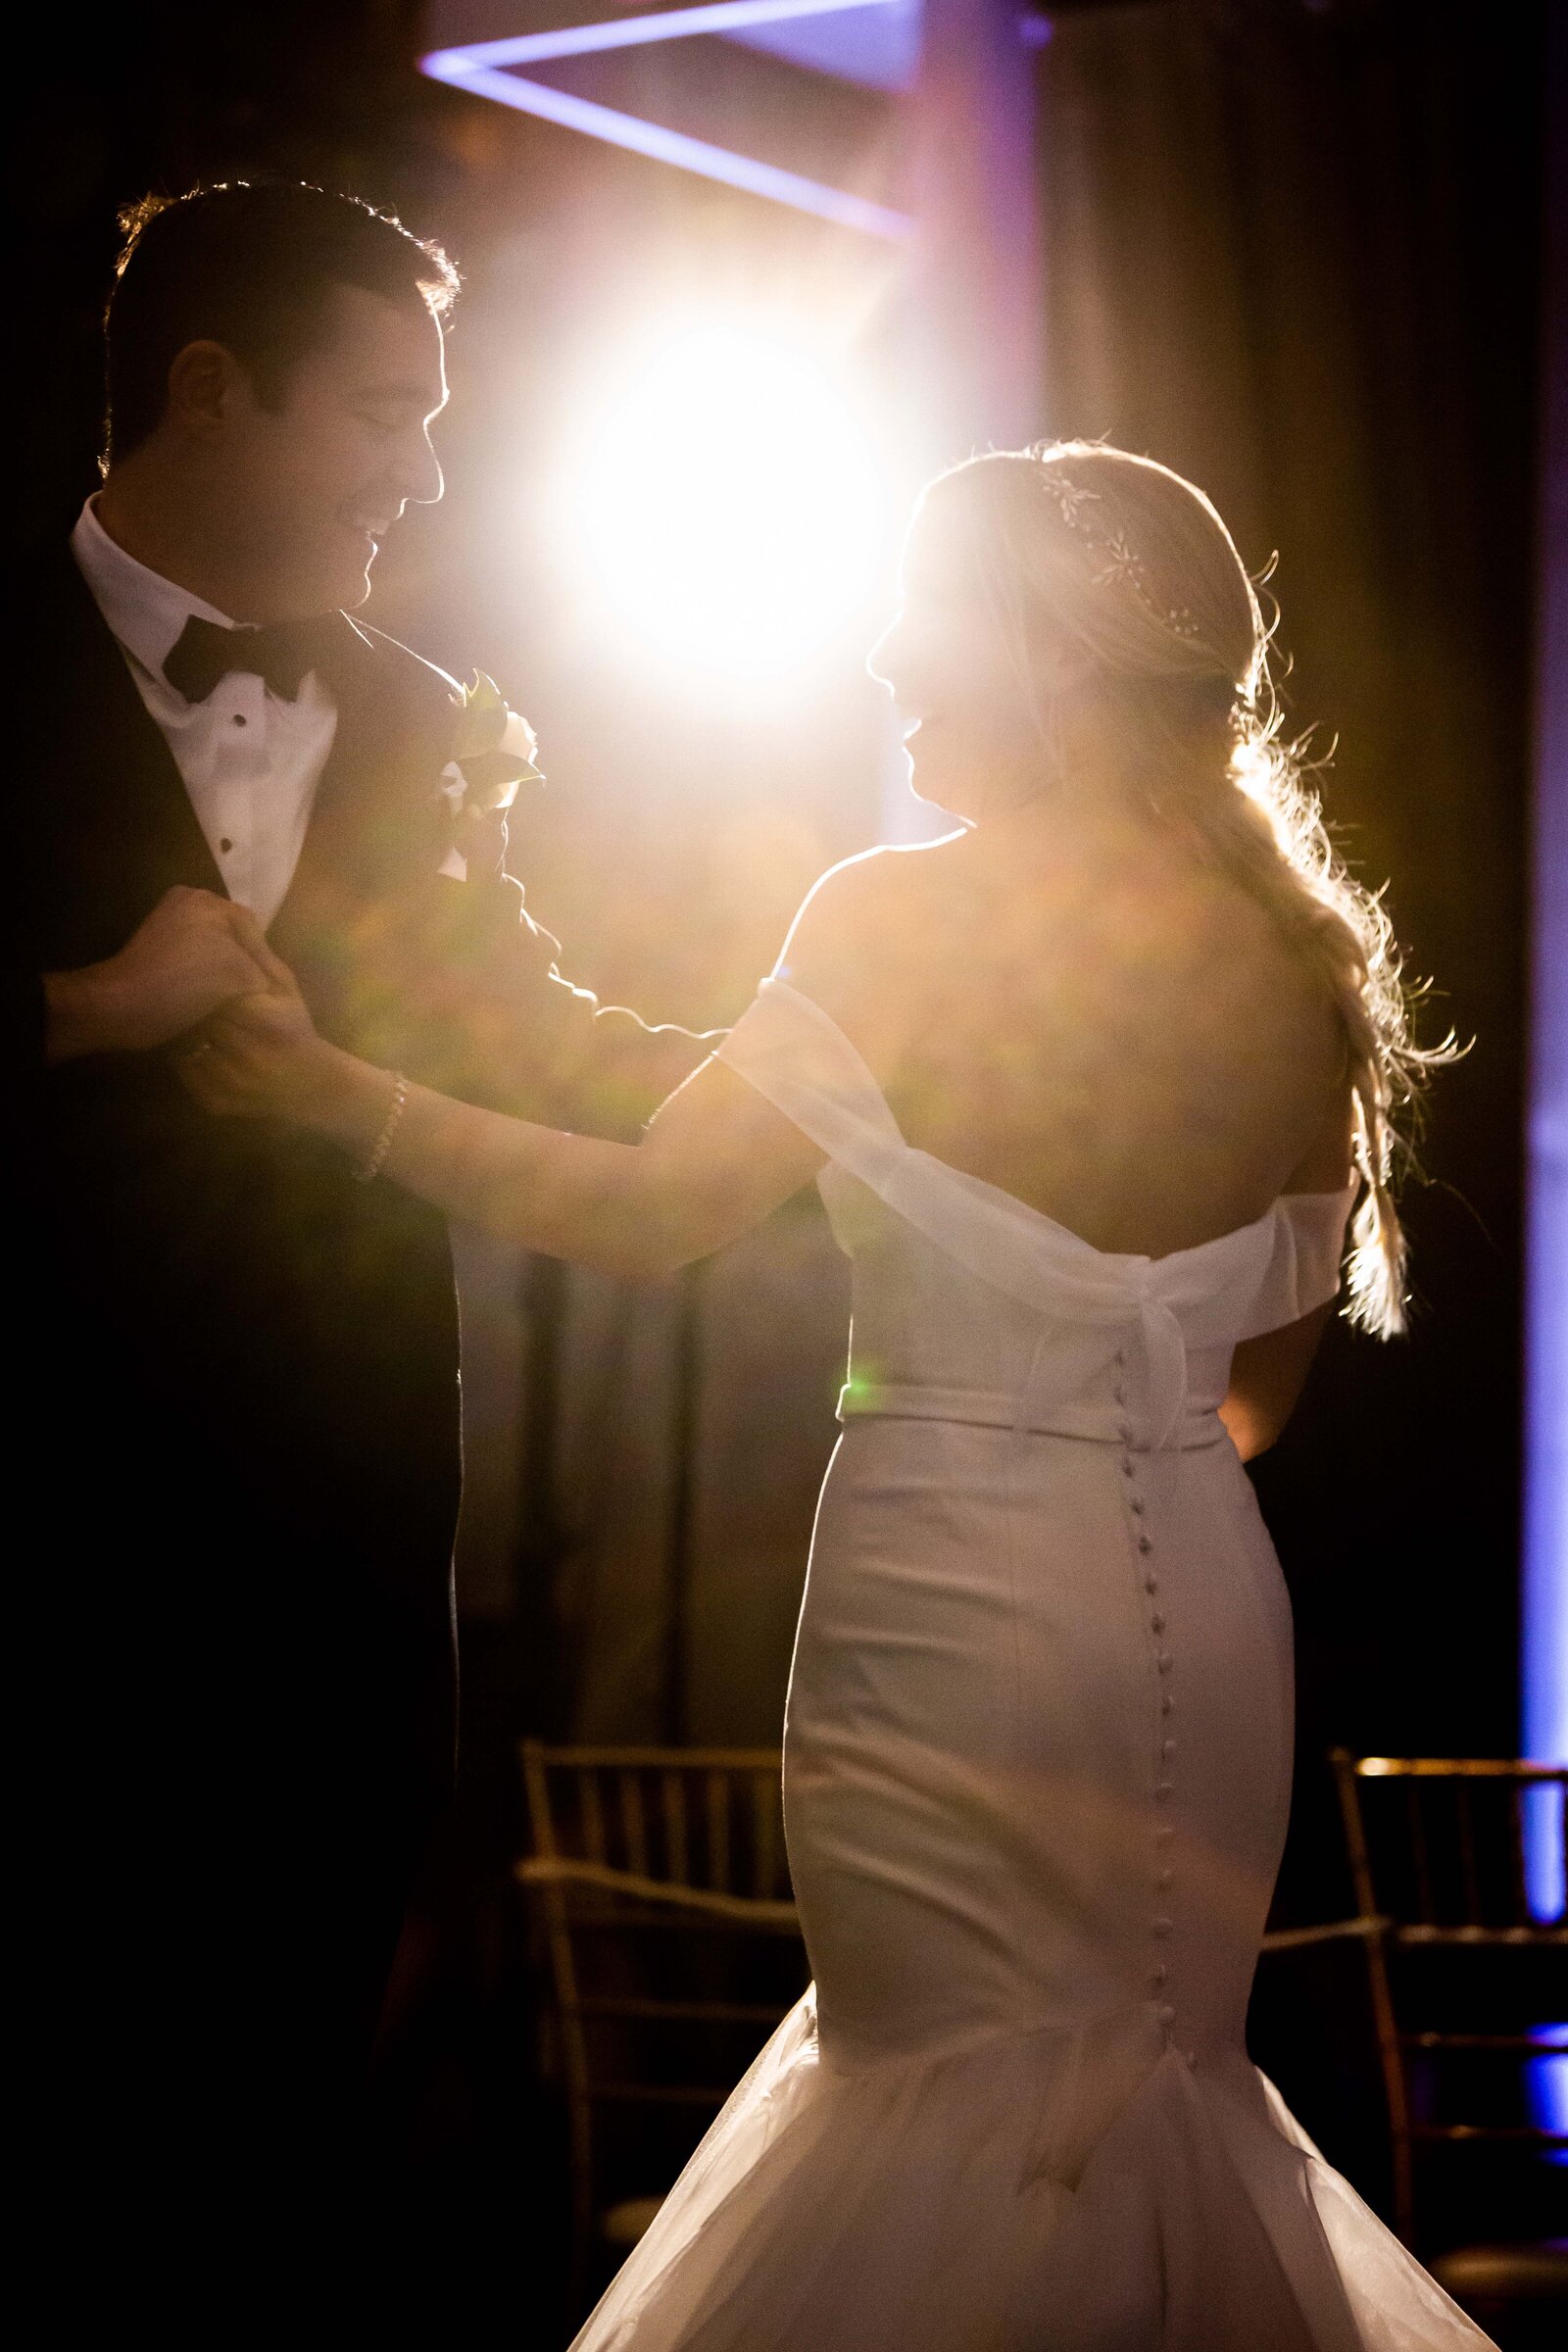 This mesmerizing photograph captures the unforgettable first dance of a newlywed couple, enveloped in a soft spotlight haze that adds a dreamlike quality to their special moment. The intimate ambiance is highlighted by the subtle play of light and shadows, creating a romantic scene that feels straight out of a fairy tale. Perfect for couples looking for wedding inspiration, this image not only portrays the love and connection between the couple but also the magical atmosphere of their wedding reception. A must-share for bridal websites and social media enthusiasts, it epitomizes the quintessence of wedding elegance and charm.